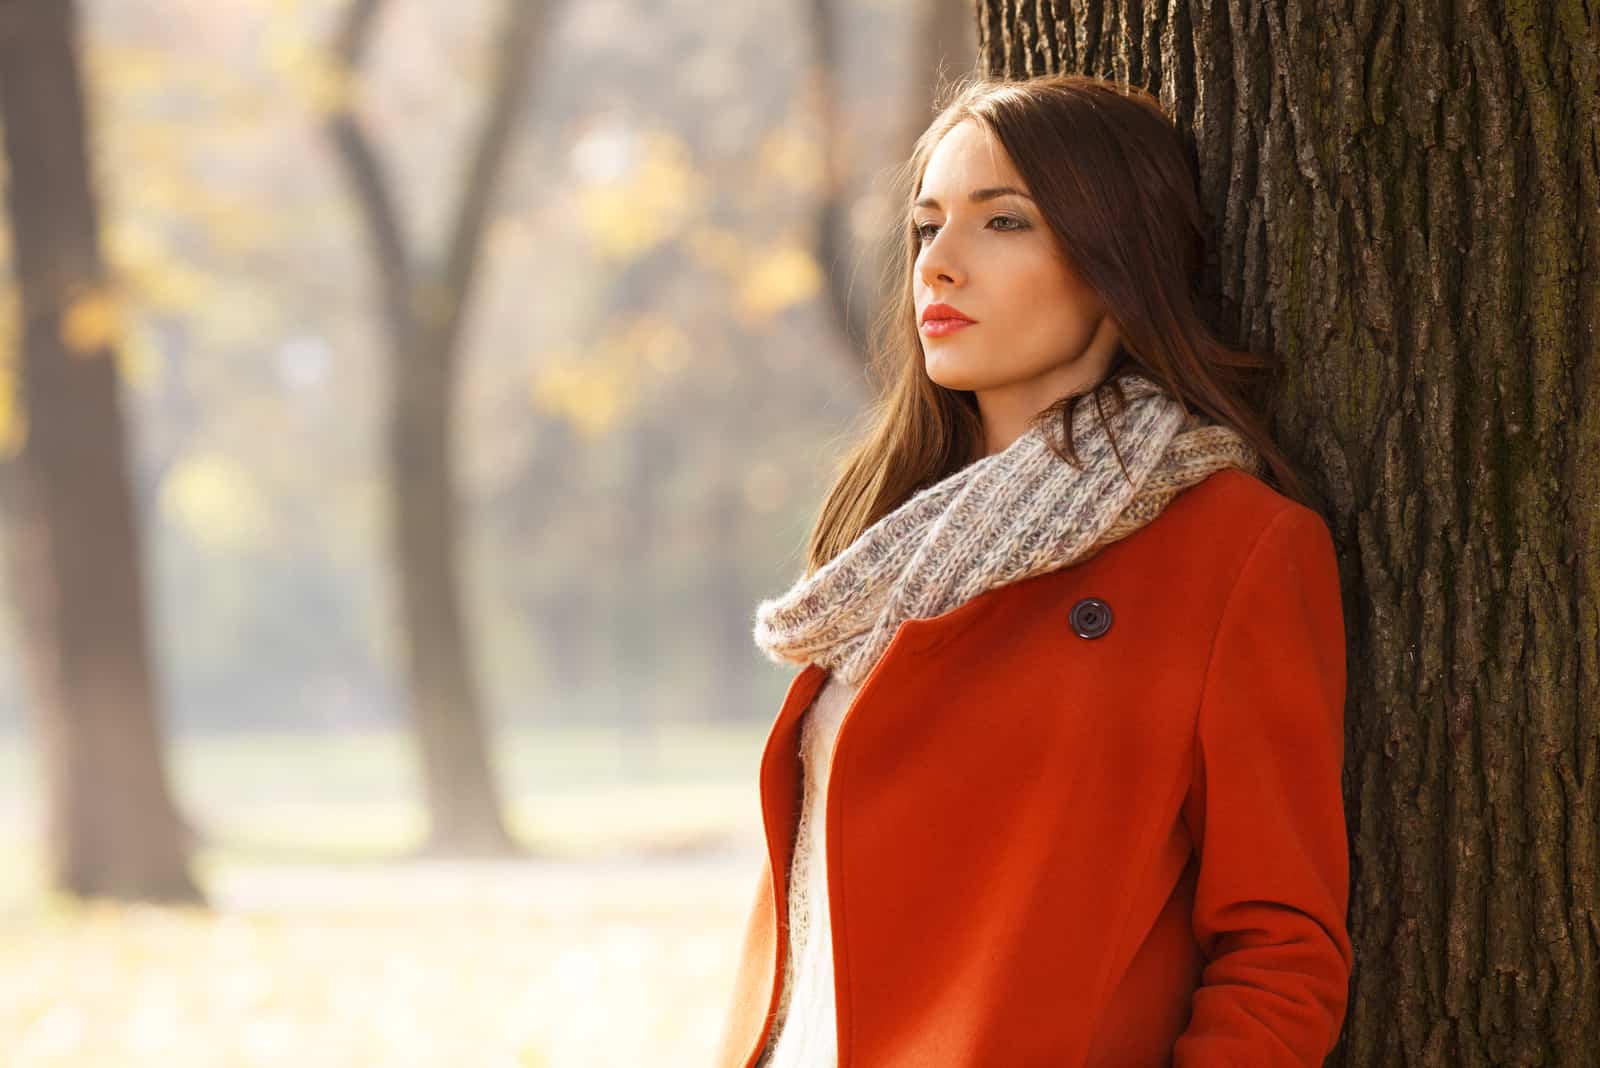 a woman with long brown hair in a red coat stands leaning against a tree